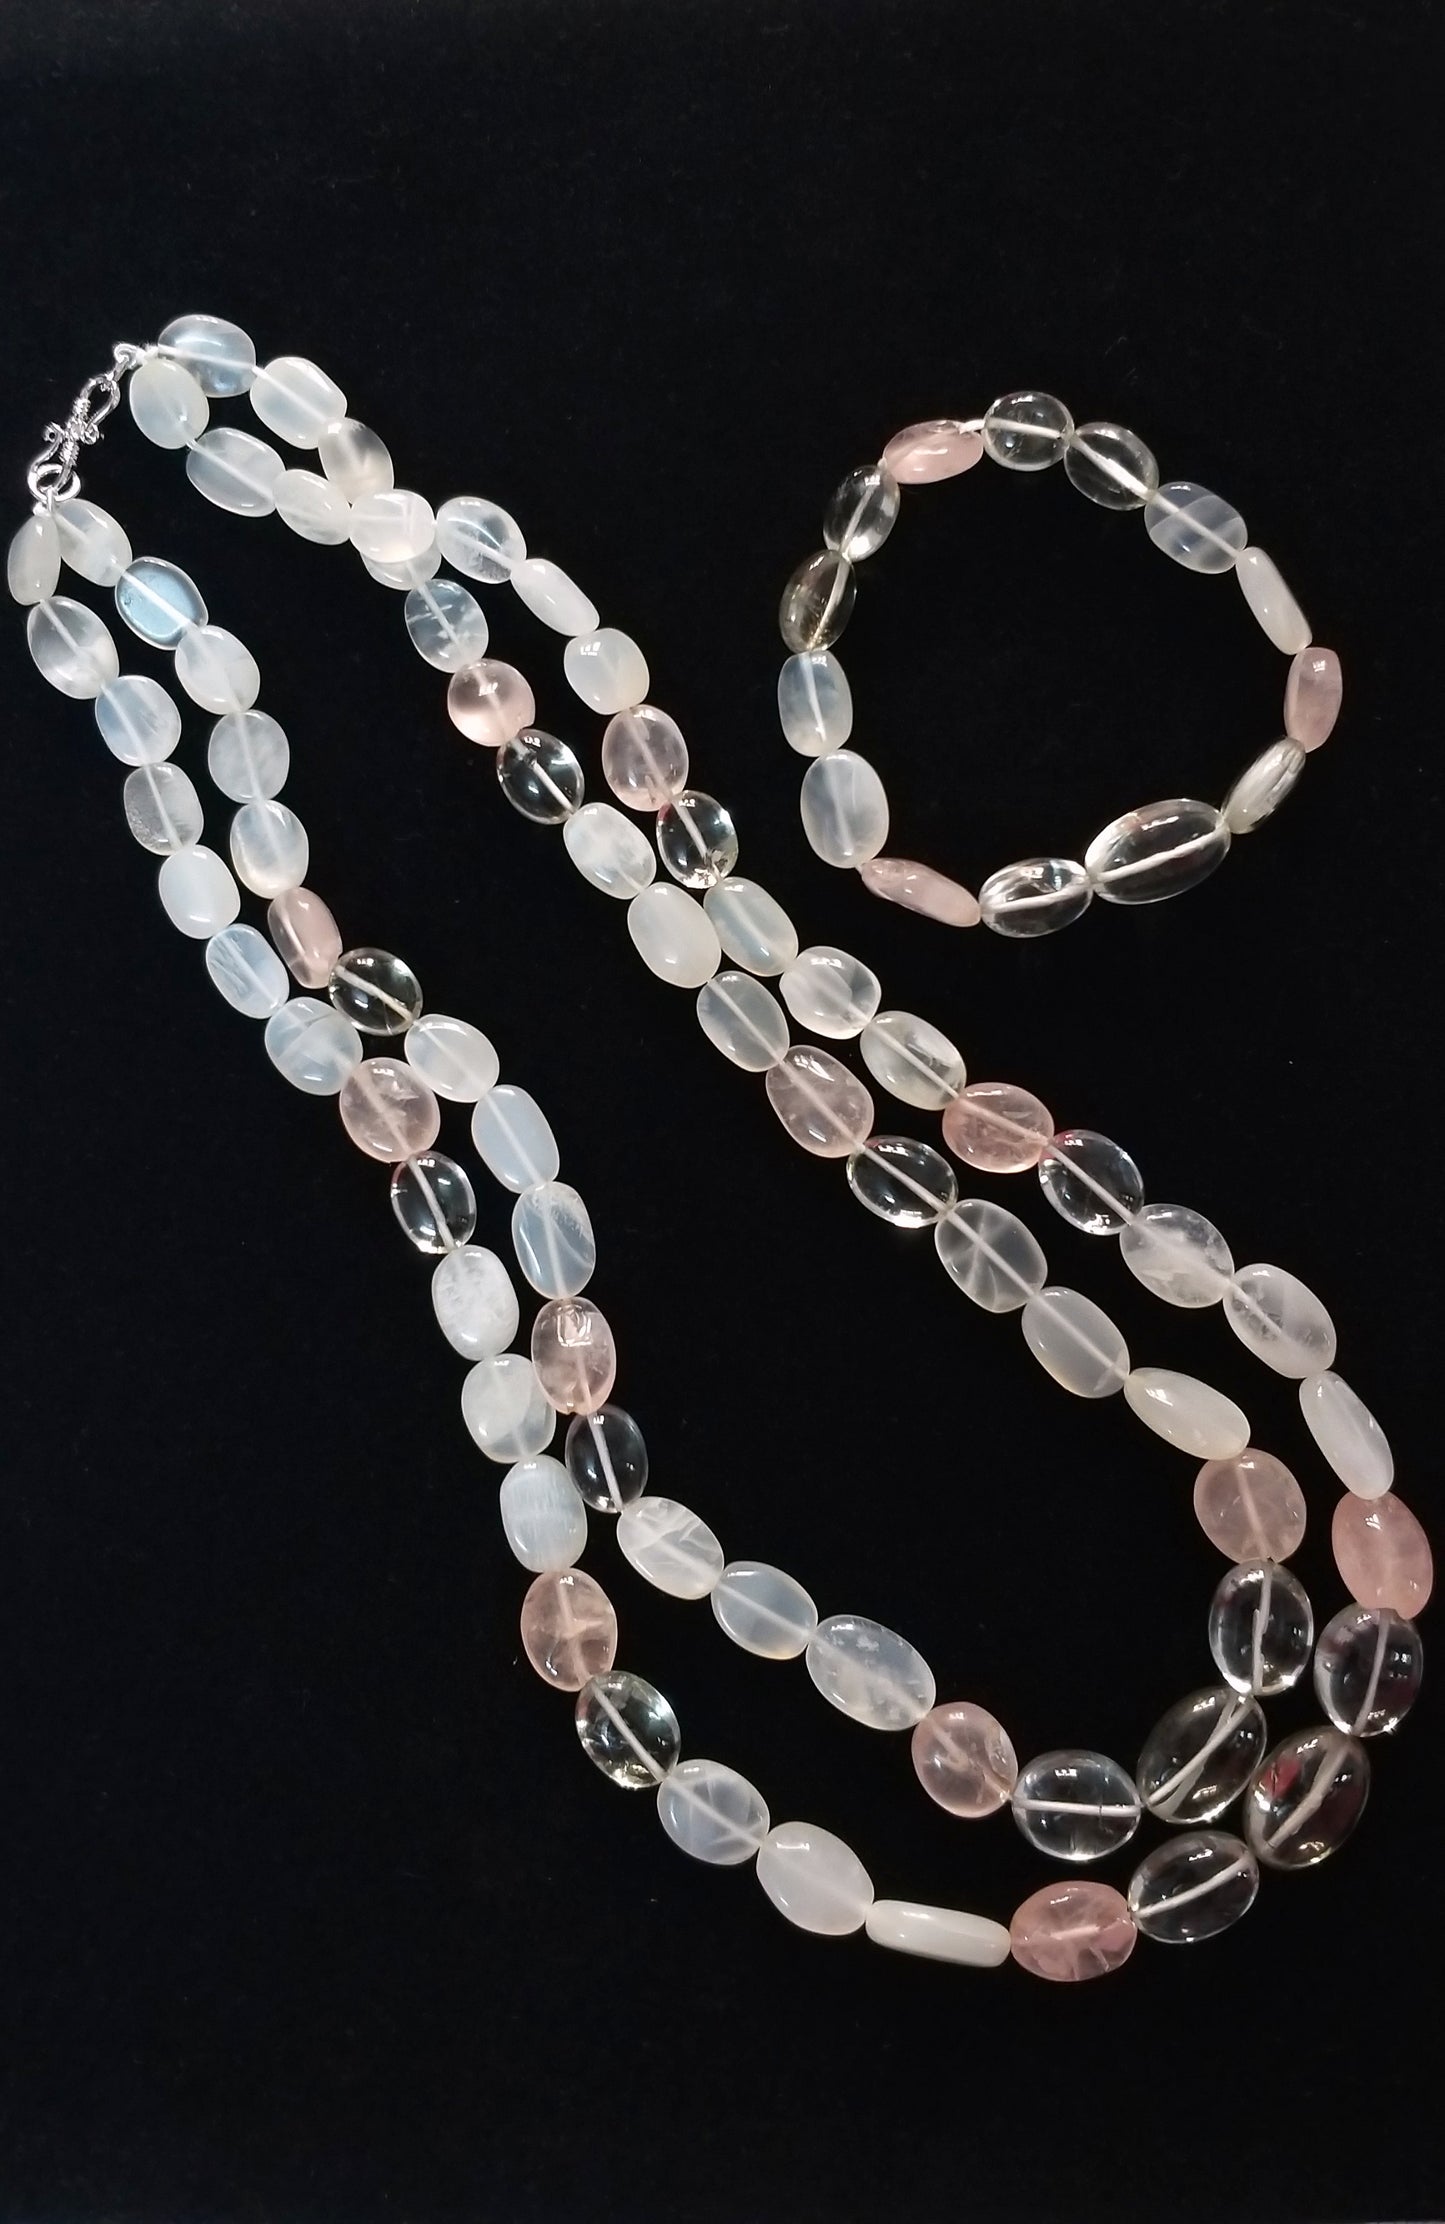 Natural Multi Color Moonstone Fancy Beads Necklace with Bracelet, Oval Beads Layered Necklace